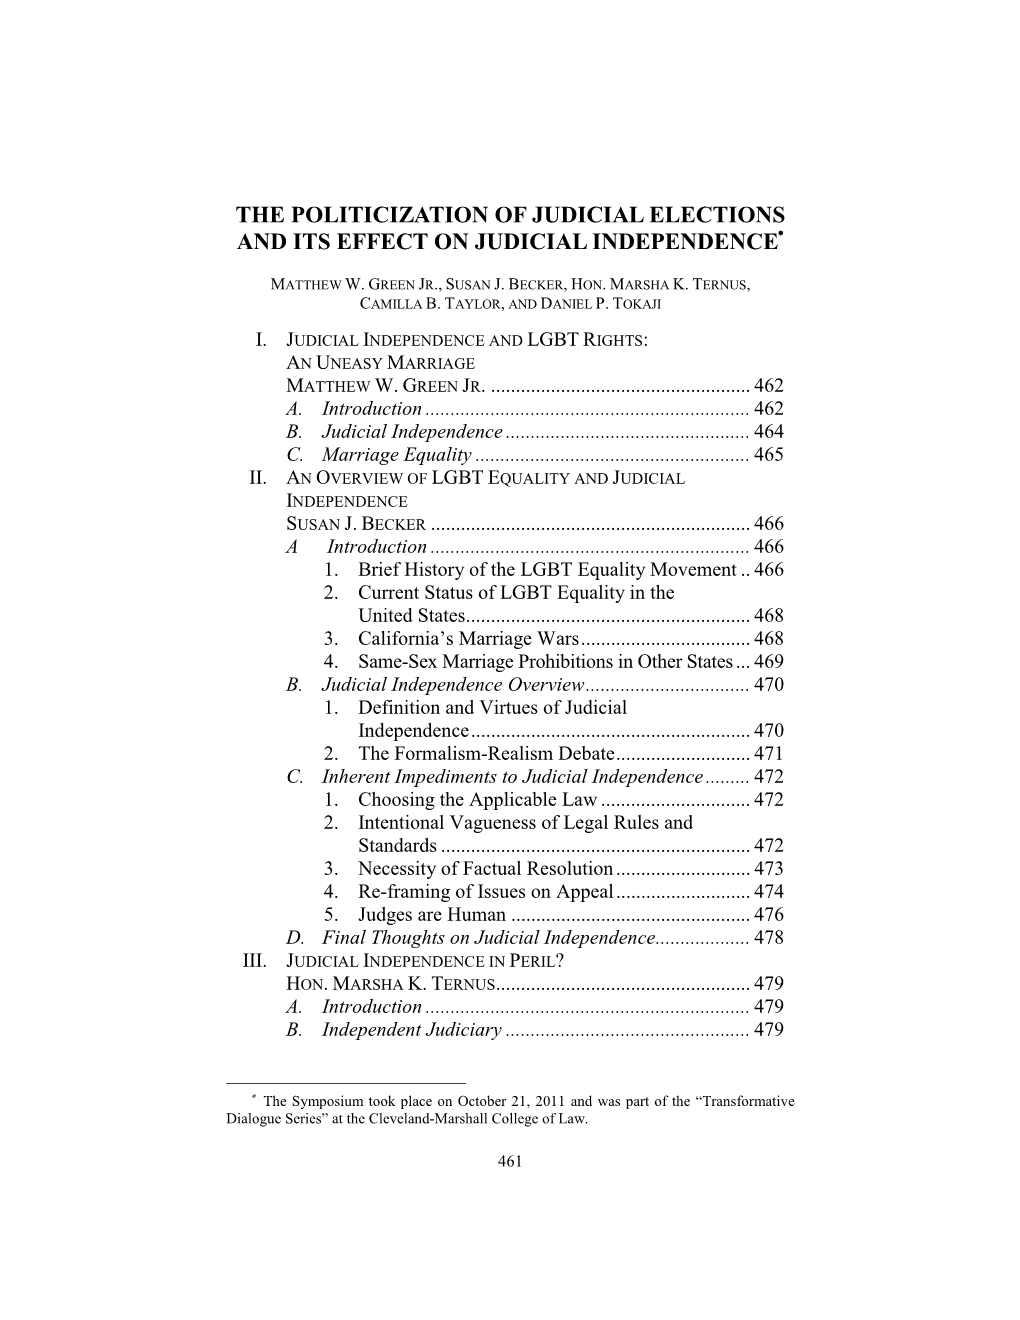 The Politicization of Judicial Elections and Its Effect on Judicial Independence∗